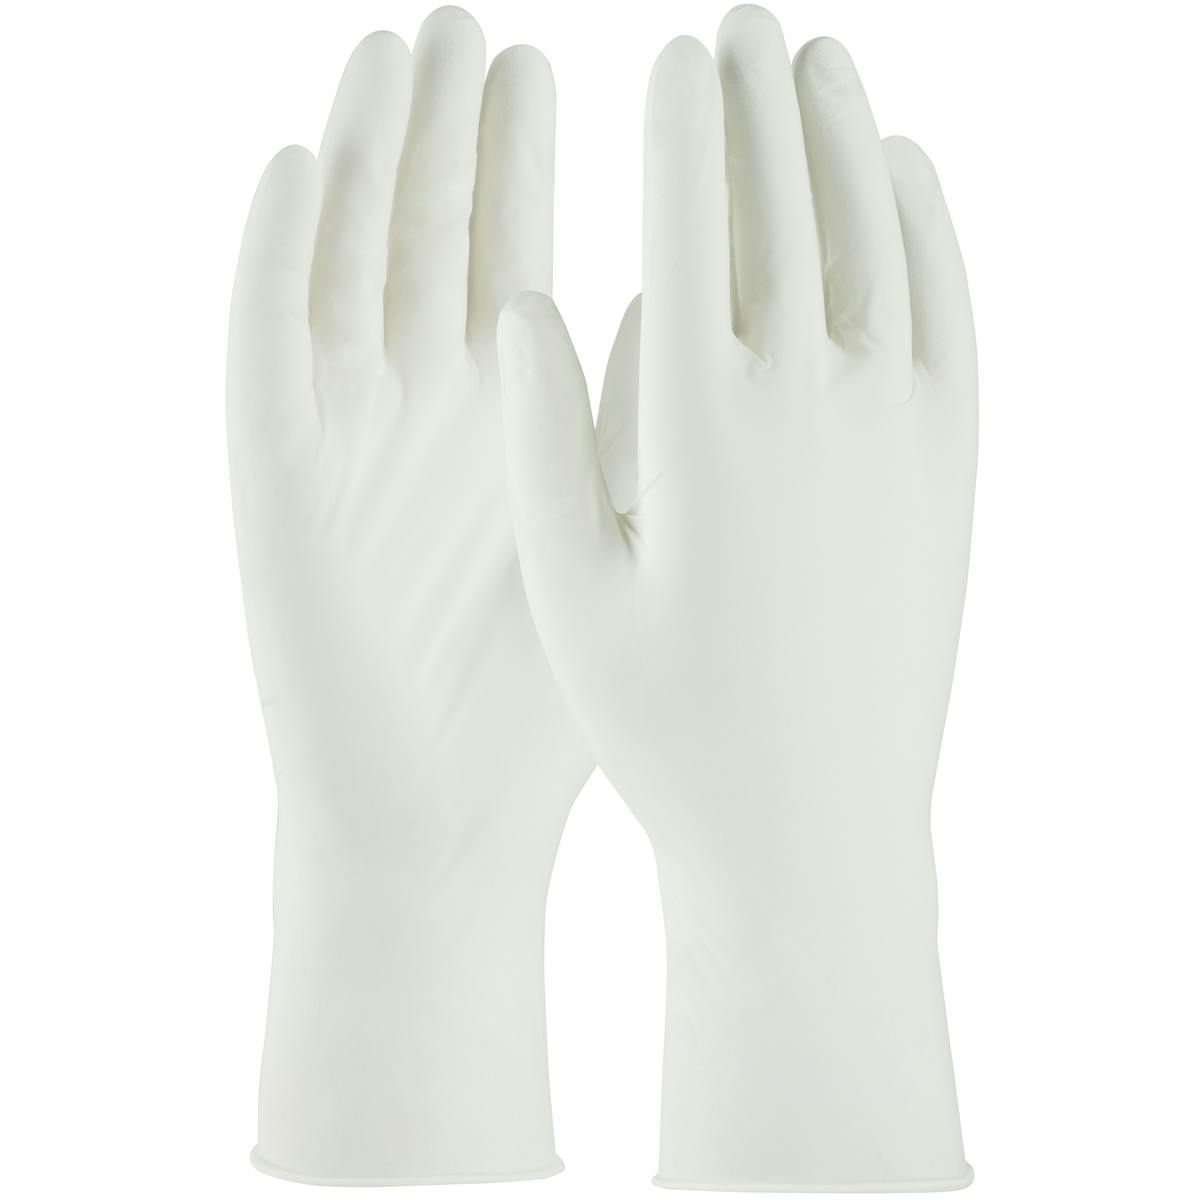 CleanTeam® Single Use Class 100 Cleanroom Nitrile Glove with Finger Textured Grip - 12" (100-333000)